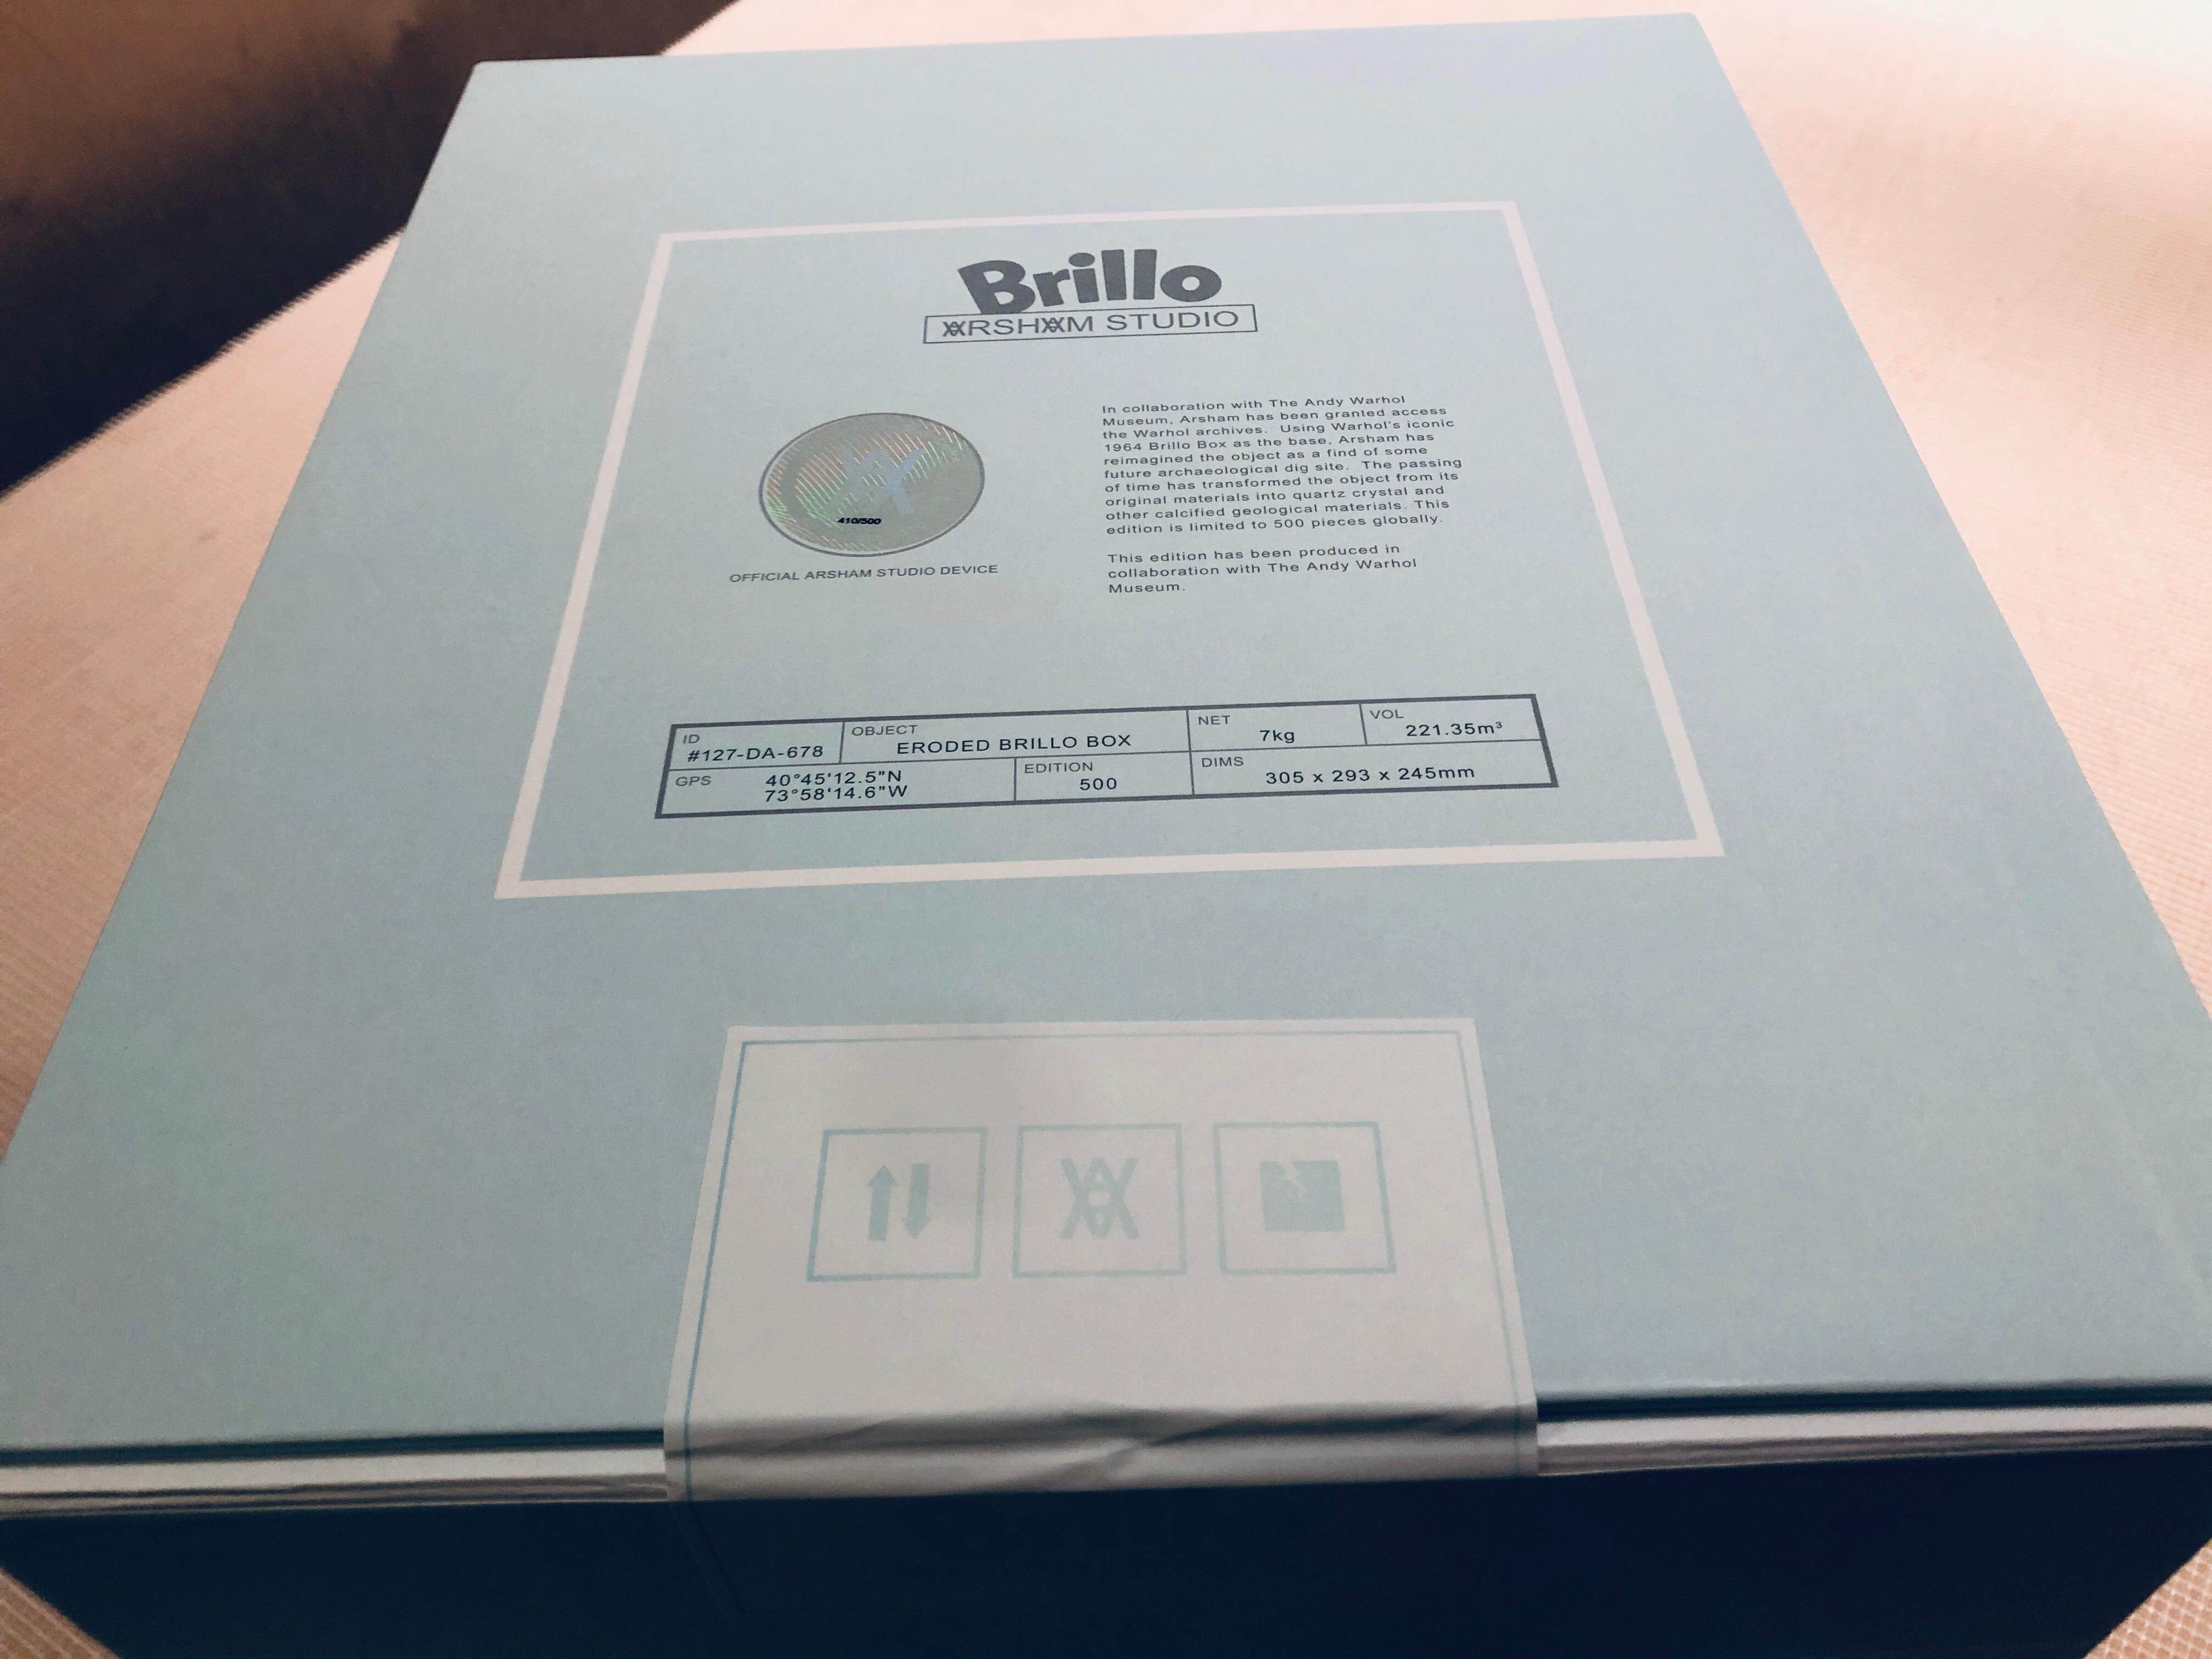 Arsham Eroded Brillo Box - Blue, Edition of 500 - based on Andy Warhol pop art For Sale 1